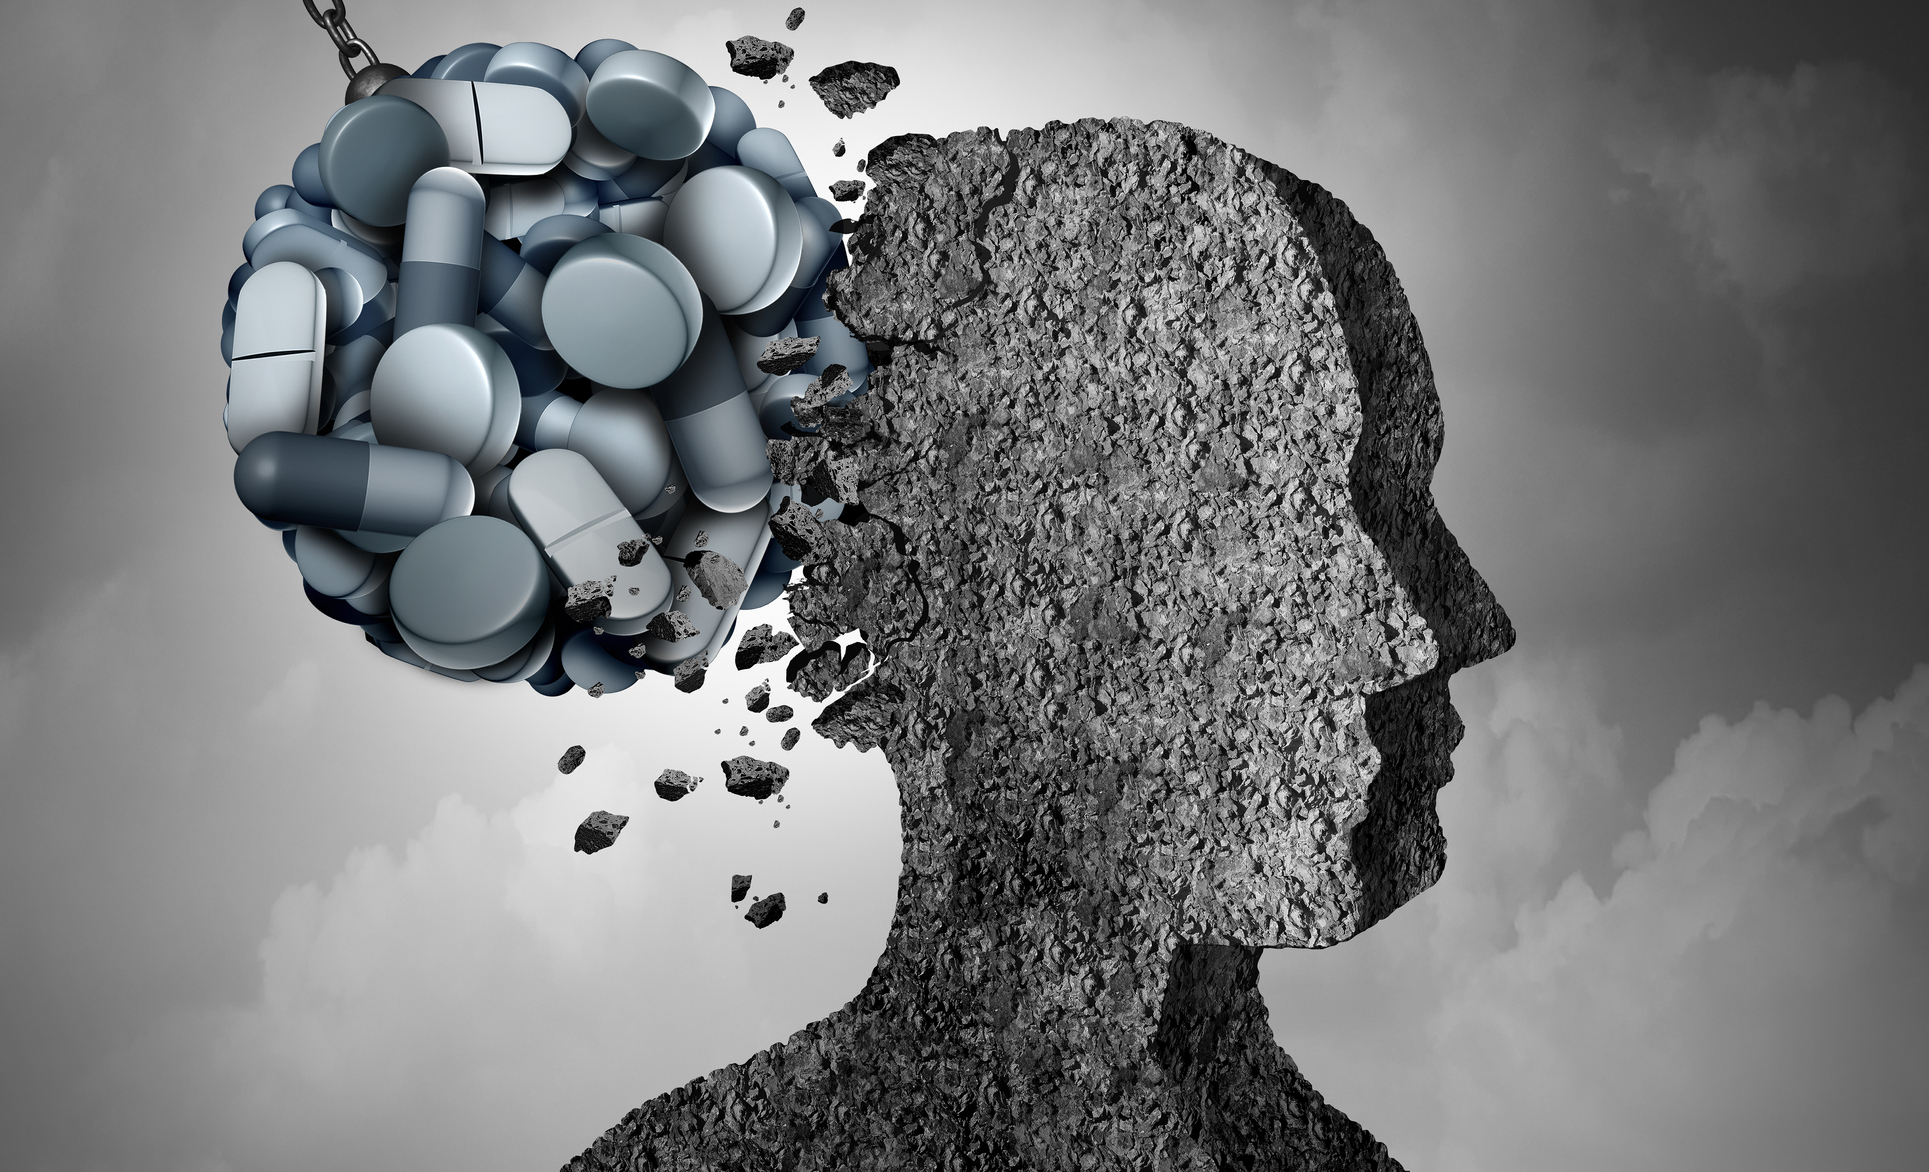 Pill addiction acts like a wrecking ball